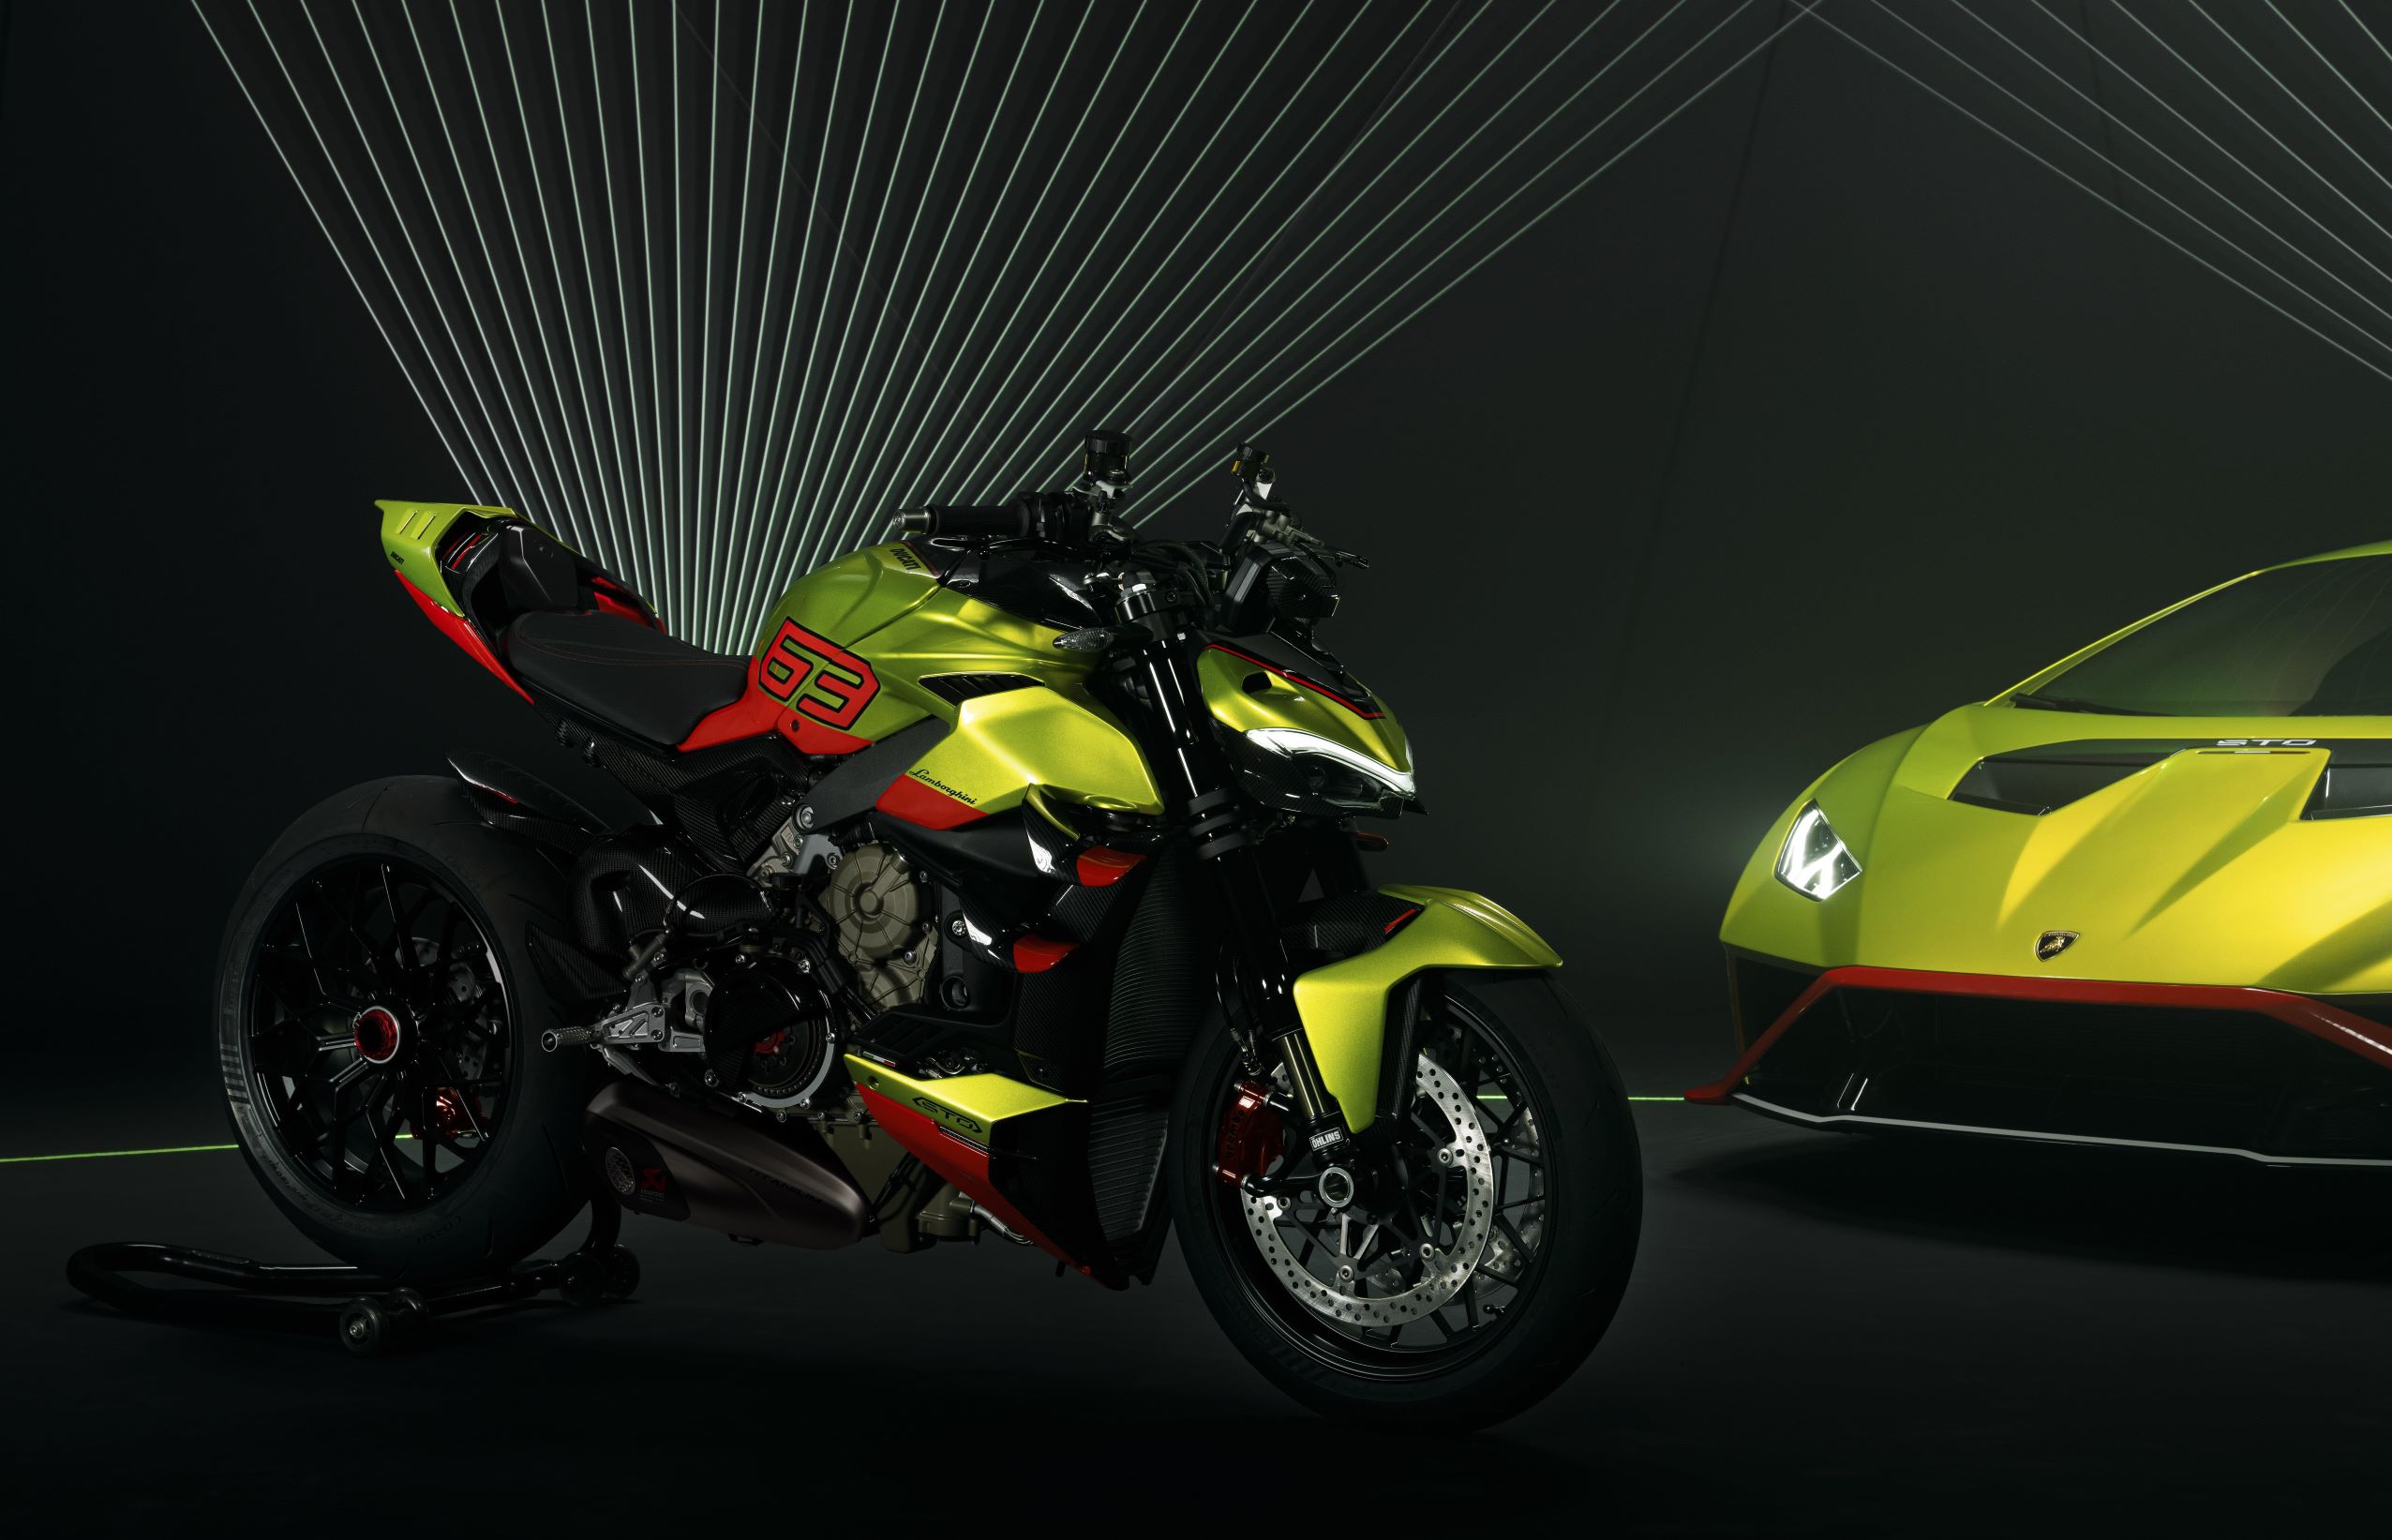 The Ducati Streetfighter V4 Lamborghini on the left and the Lamborghini Huracan STO on the right, both in green and orange livery